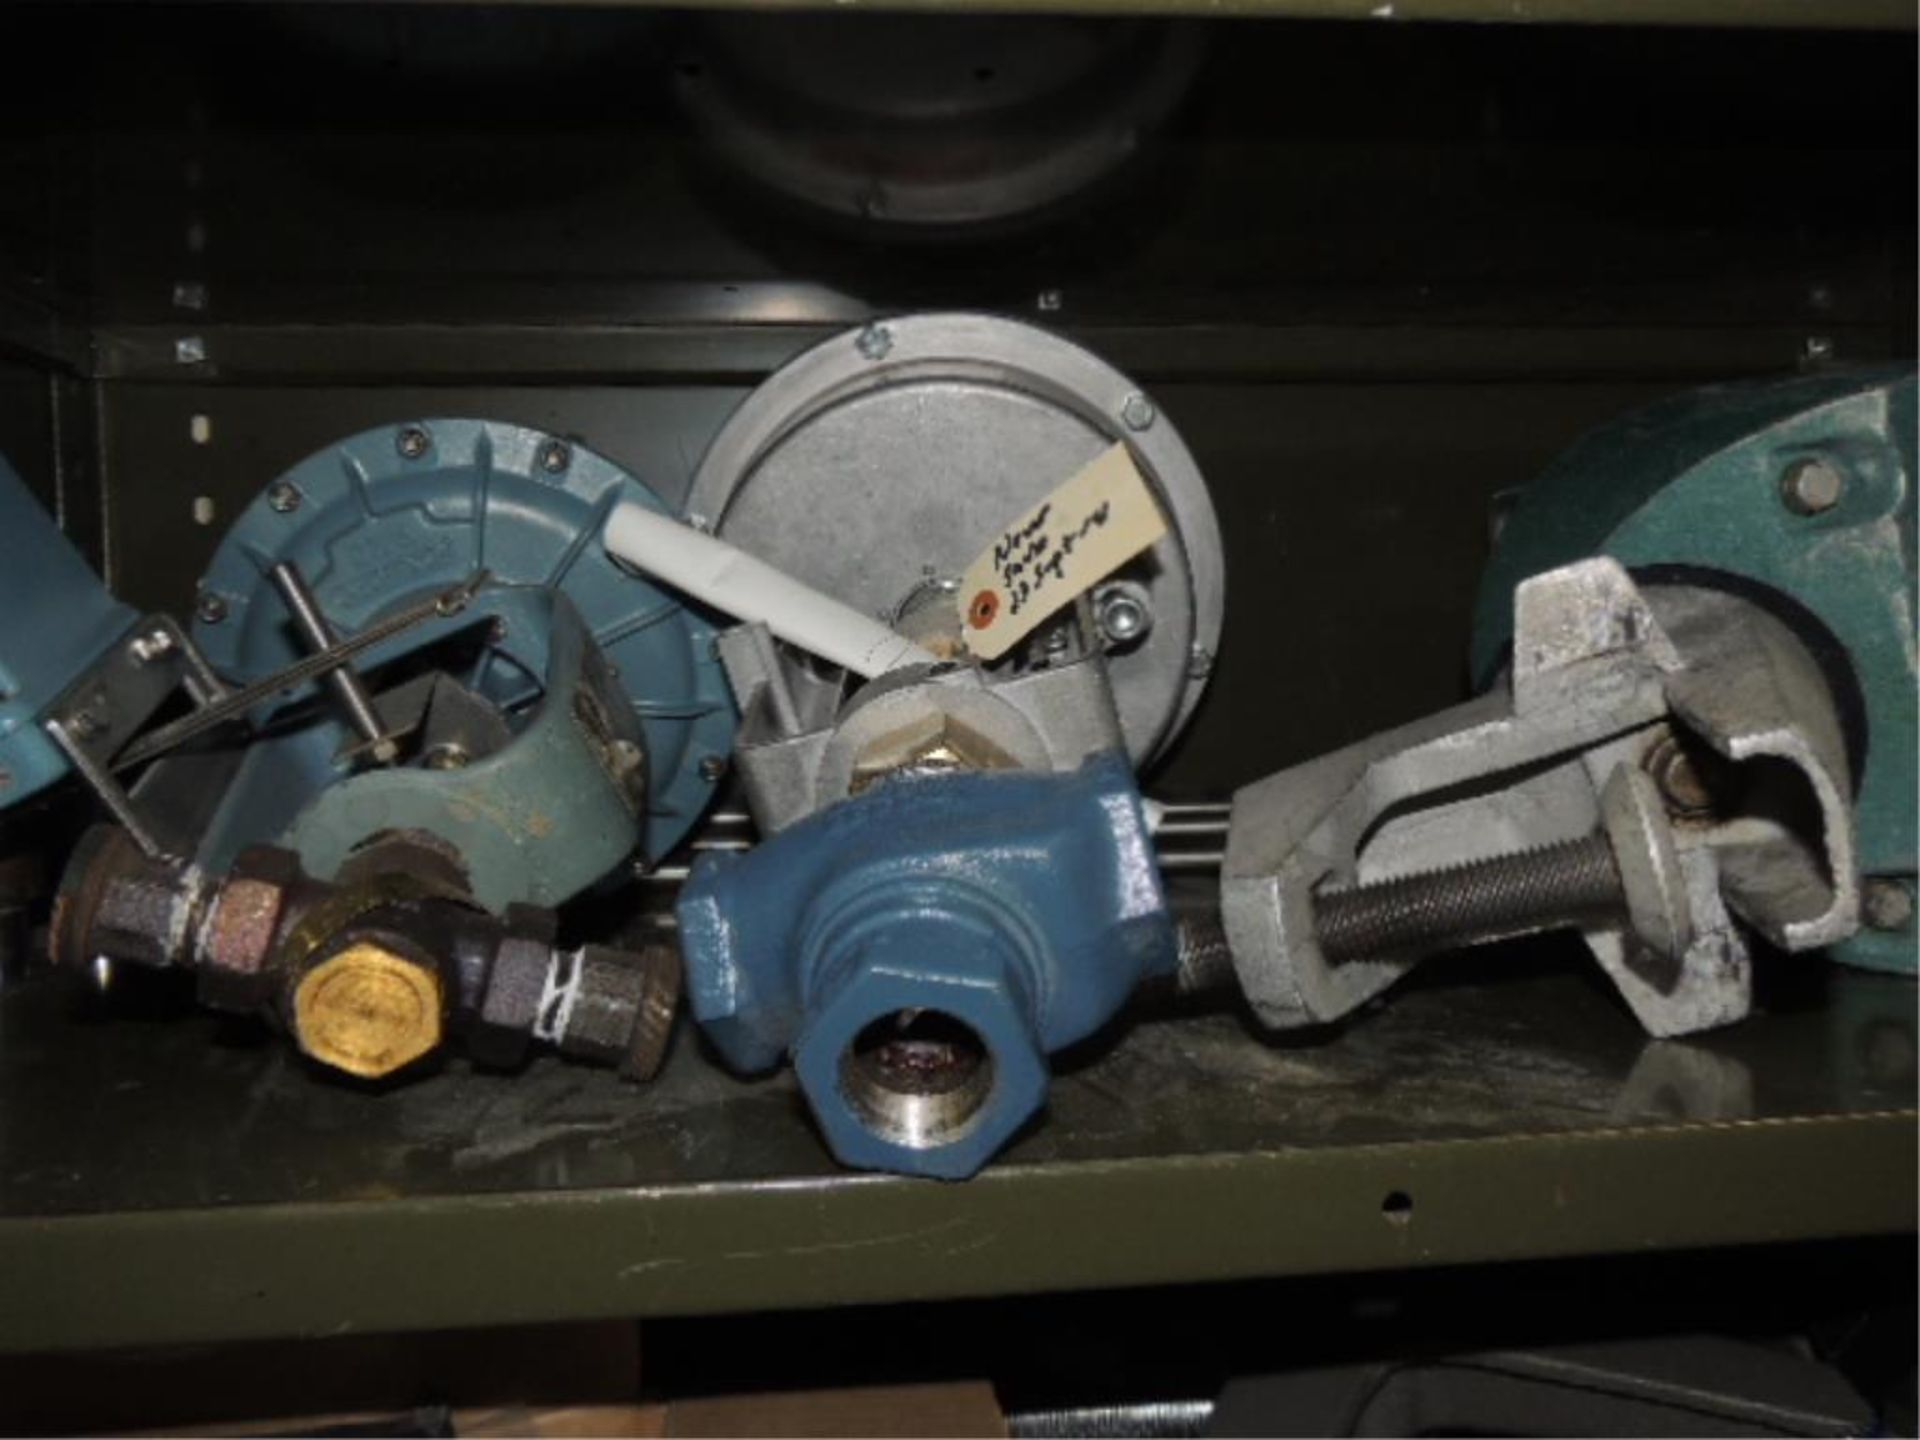 Powerflo Pumps/parts; Lot: 2 door storage cabinet and shelving contents included, rebuilt pumps - Image 26 of 29